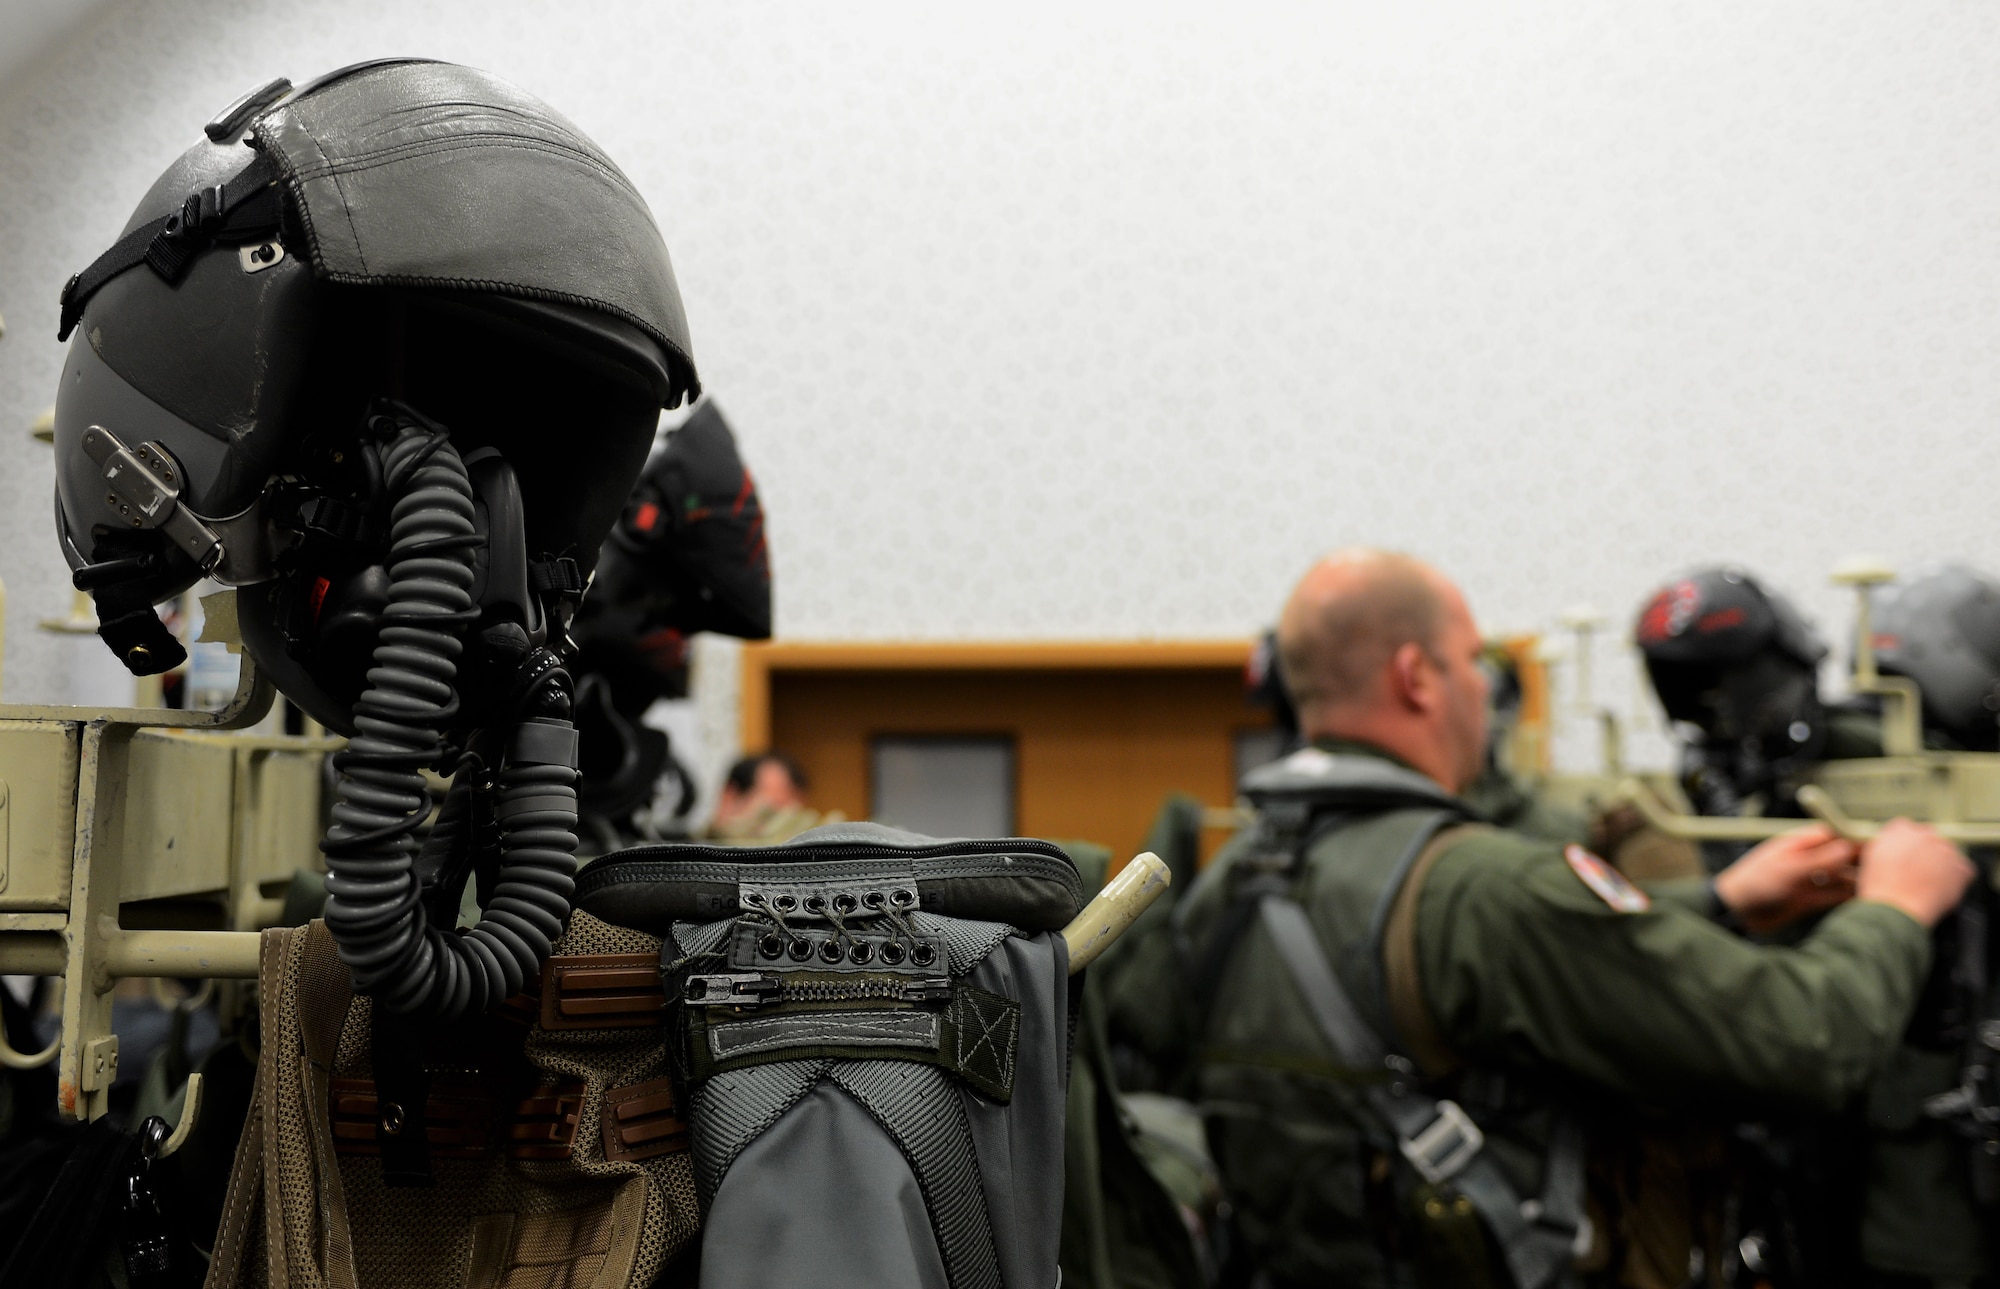 A fighter pilot’s helmet and gear rests in an equipment room at Spangdahlem Air Base, Germany, Dec. 17, 2014. Fighter pilots from Royal Air Force Lakenheath, England; Aviano Air Base, Italy; and Spangdahlem joined together to participate in exercise Iron Hand 15-2. (U.S. Air Force photo by Airman 1st Class Luke Kitterman/Released)